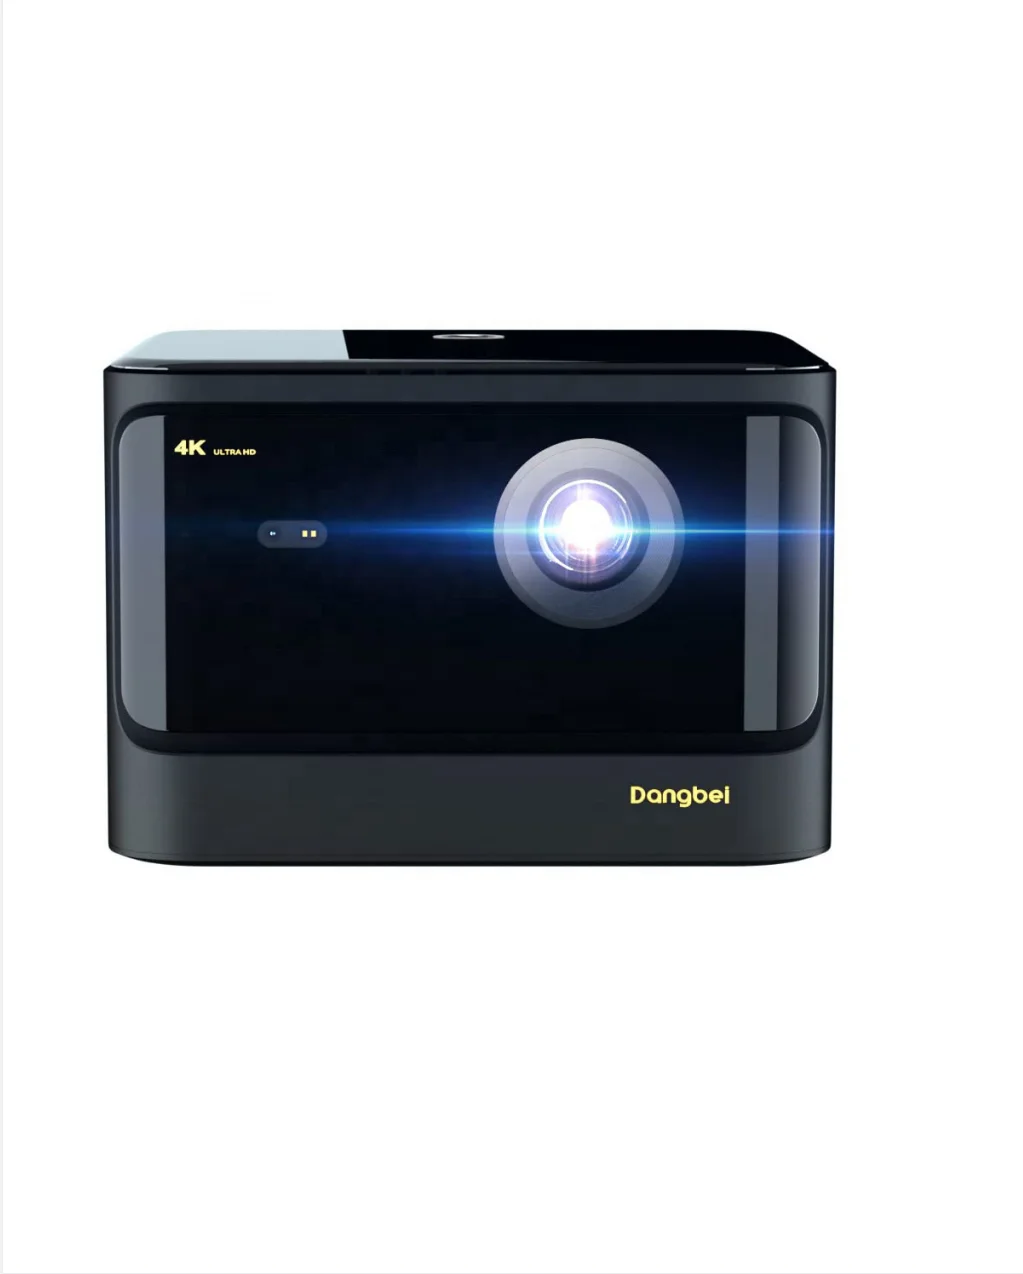 

Dangbei Mars Pro 4K Projector, Global Version 3200 ANSI Lumens Laser Projector with Android 3D Show Auto Focus HDR home theater